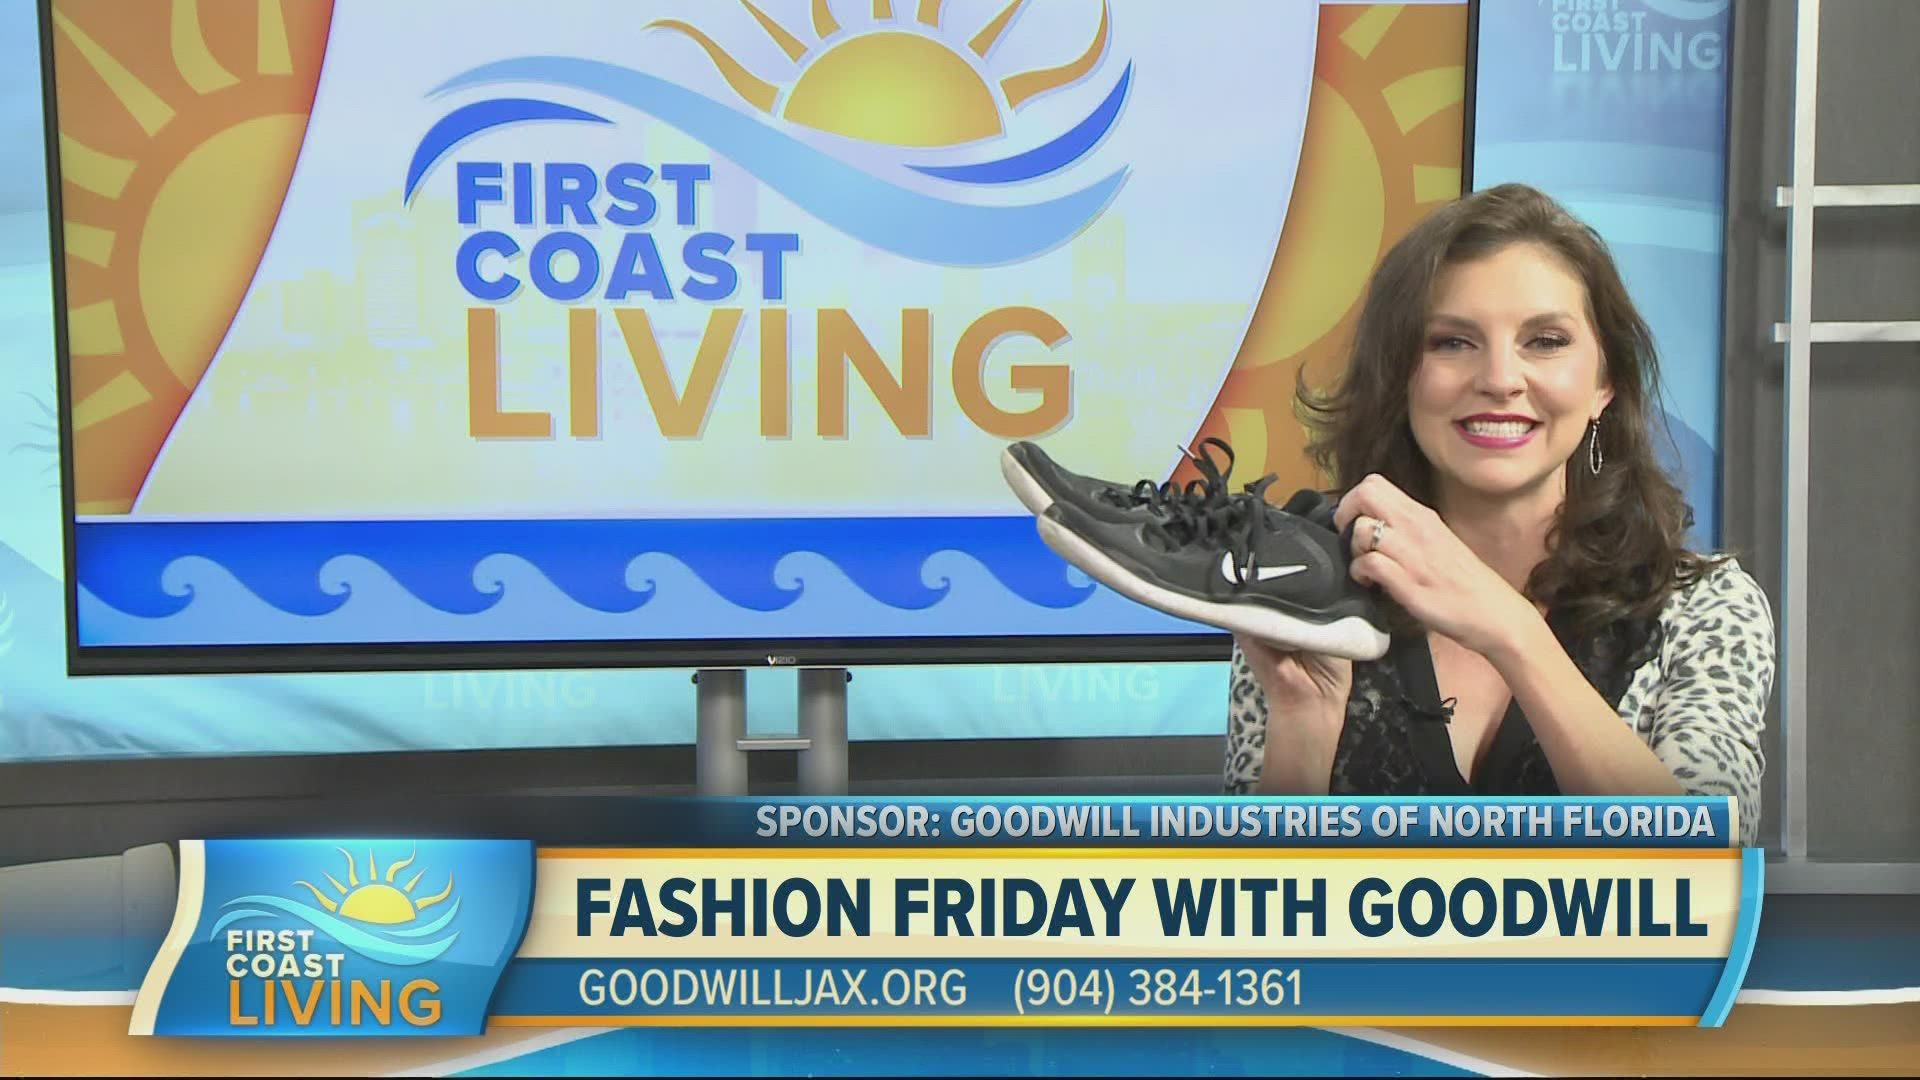 Jordan found three pairs of name brand sneakers that will take her from walking to running without breaking the bank.